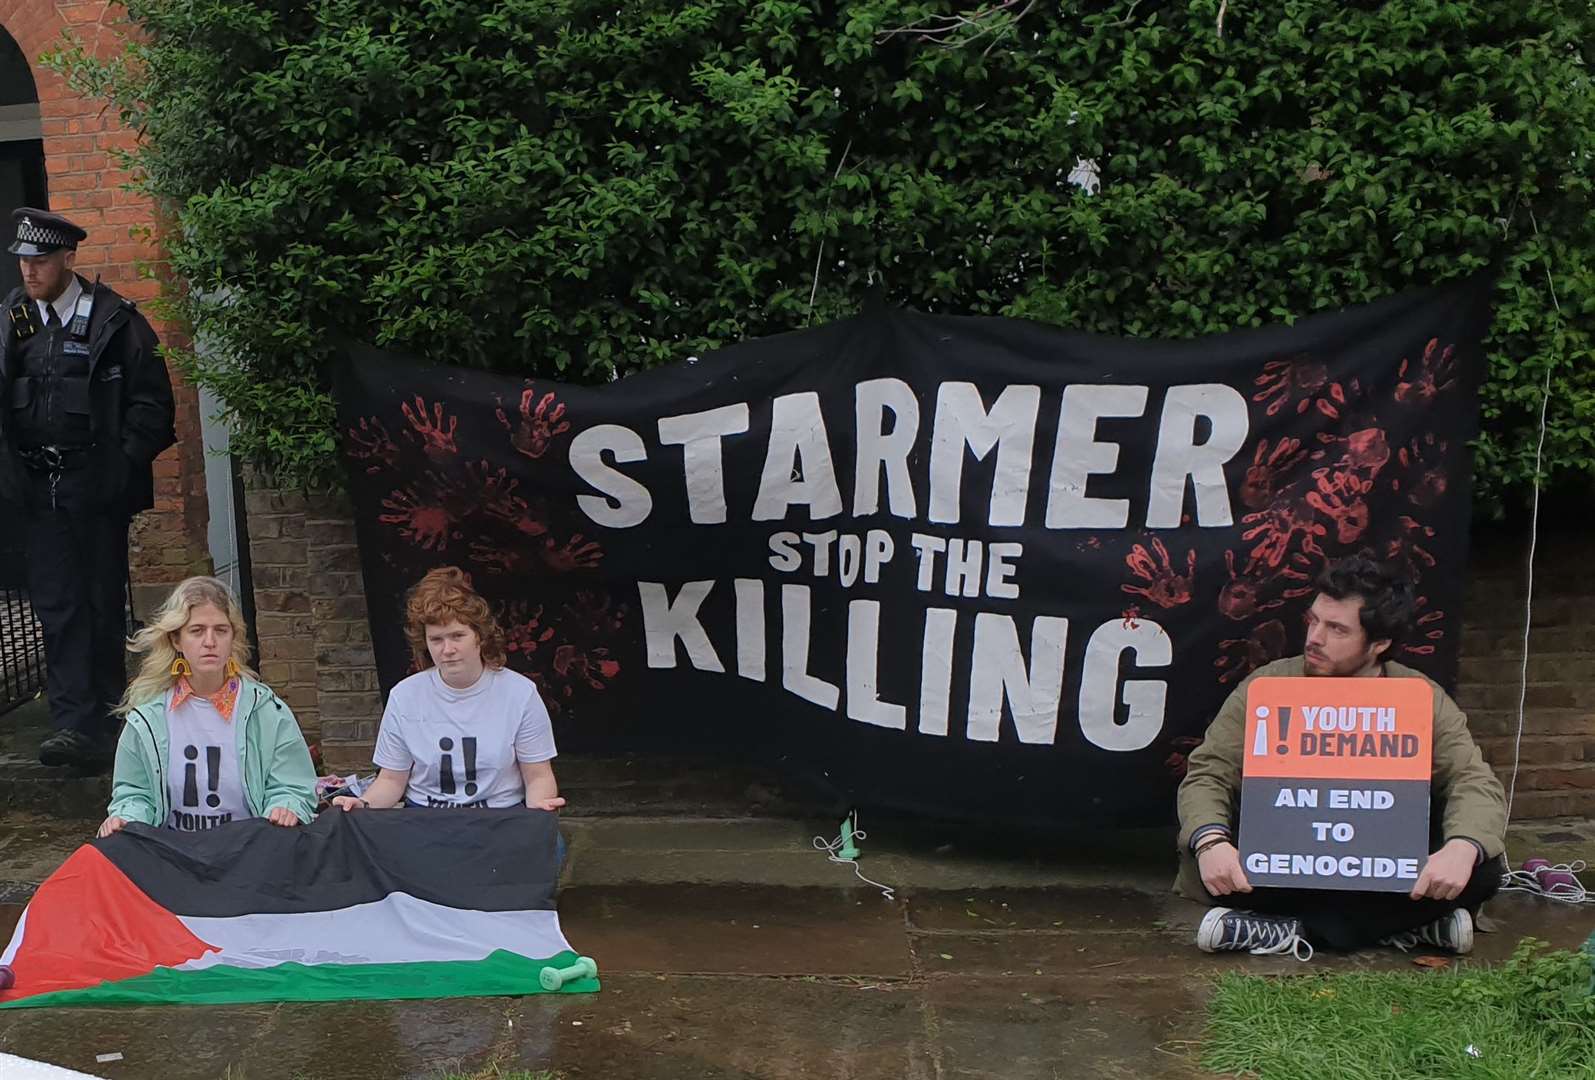 Lewis, left to right, Ward and Formentin hung a banner outside Sir Keir’s house during their protest (Youth Demand/PA)